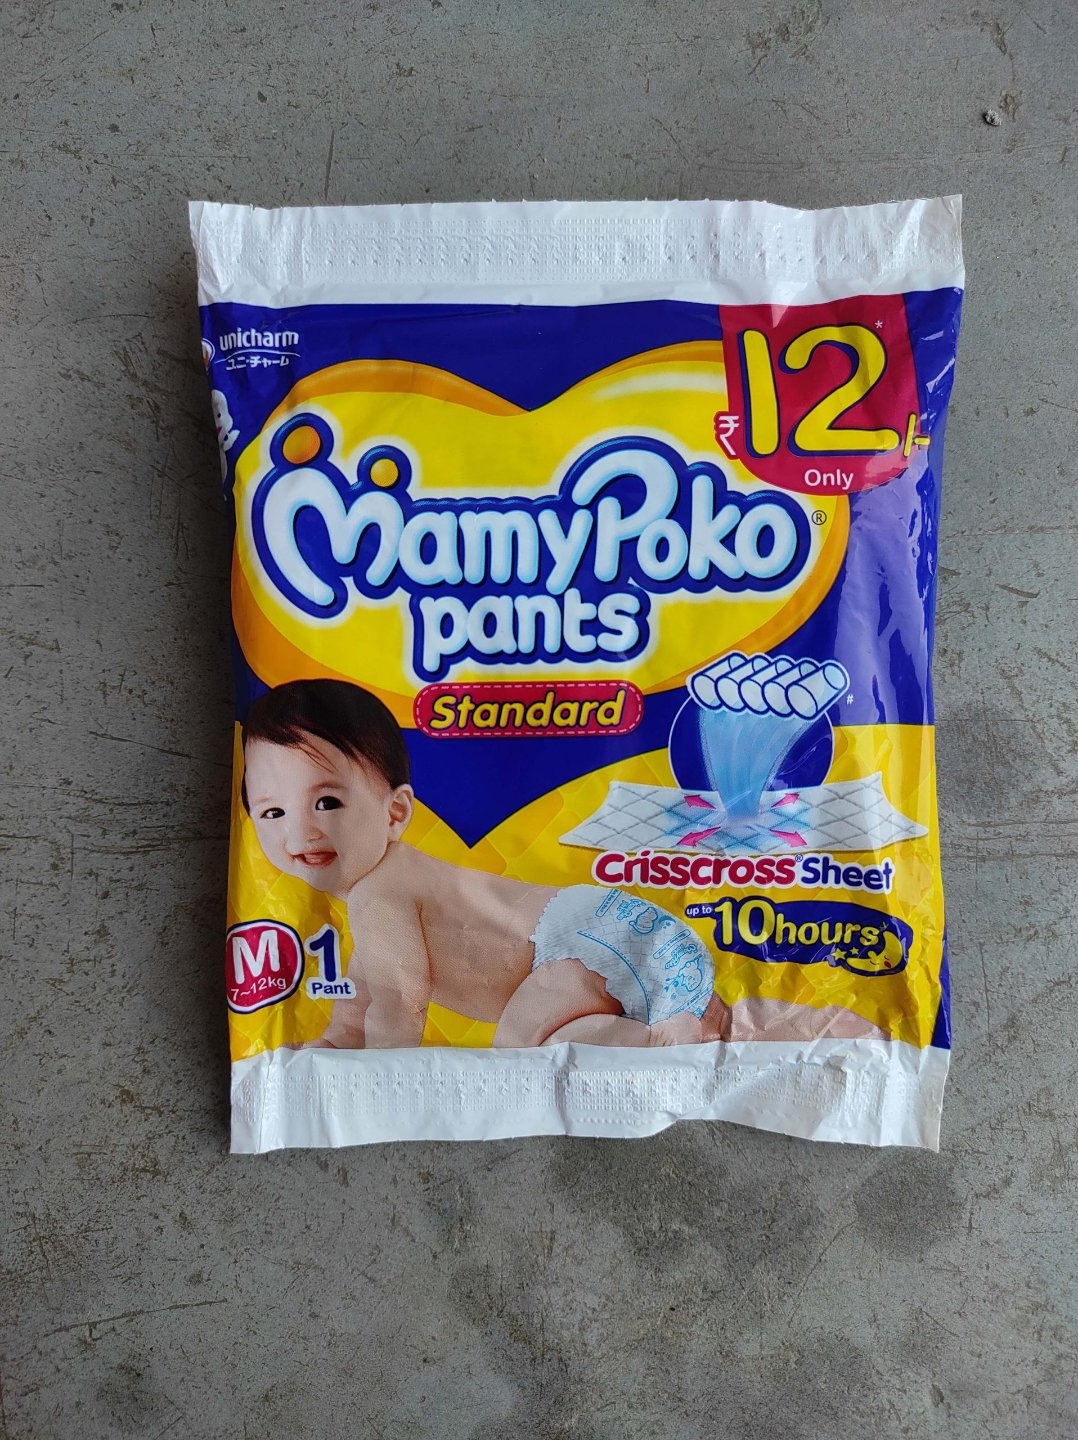 White Crisscross Absorbent Sheet Extra Absorb Mamypoko Diaper Pants Upto 10  Hours S at Best Price in Ghaziabad  Unicharm